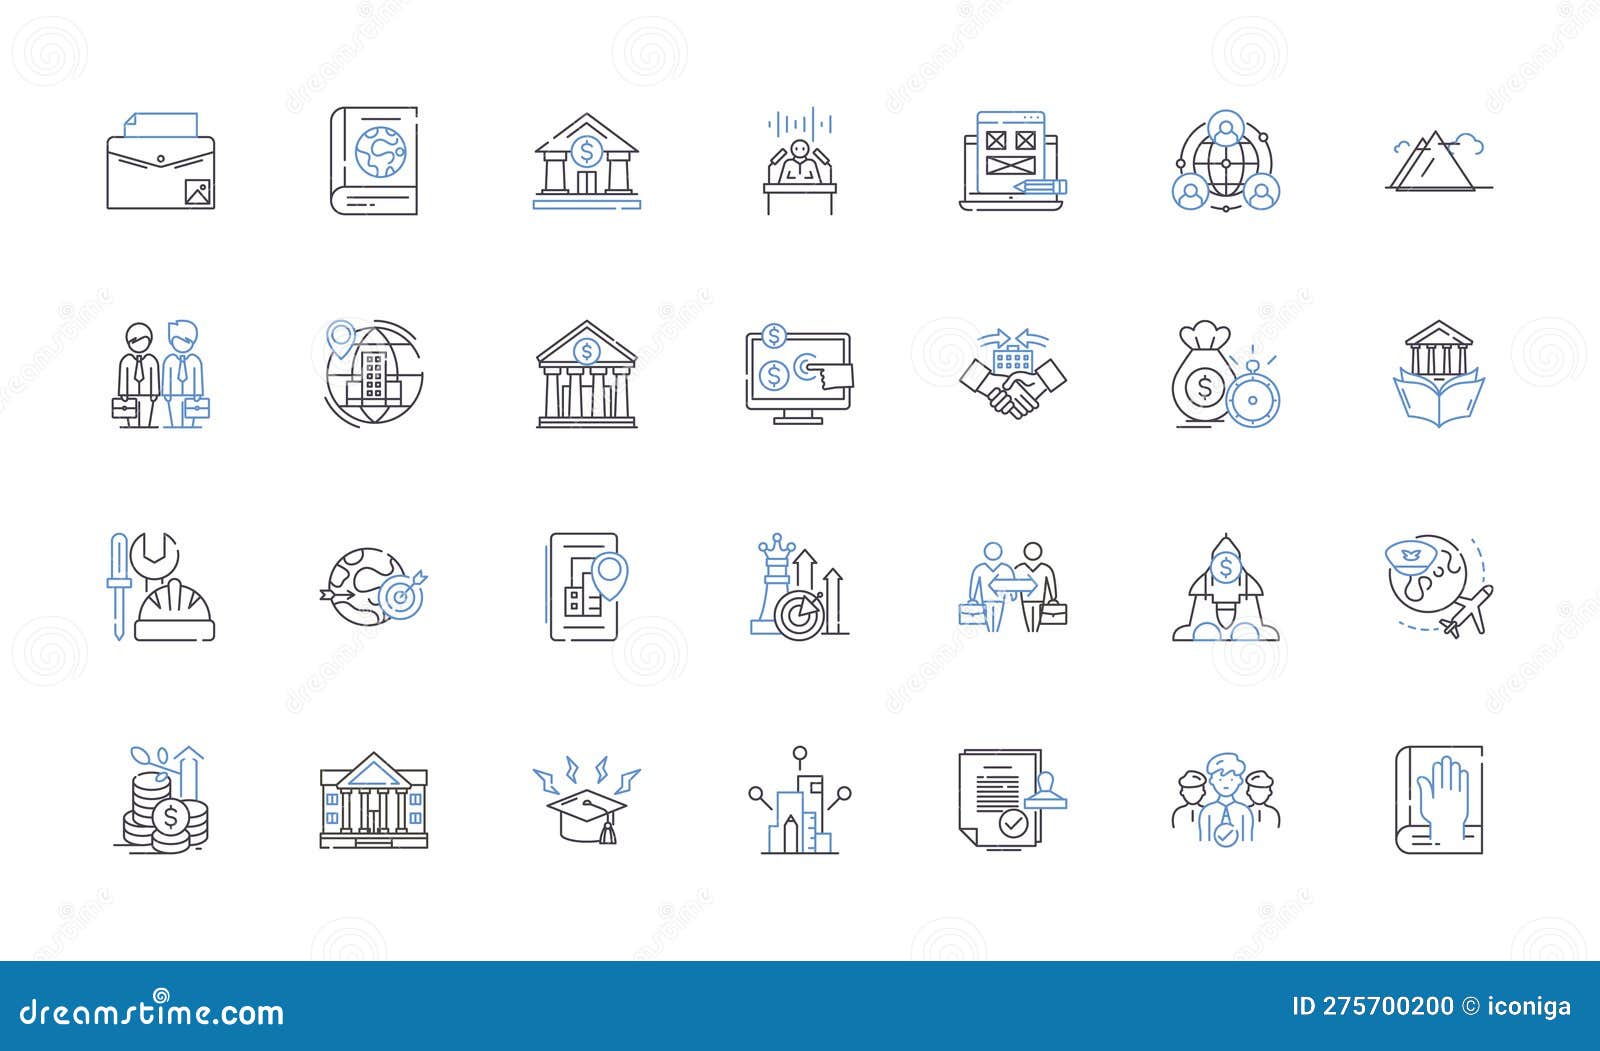 rule polity line icons collection. governance, authority, regulations, jurisdiction, order, control, leadership 